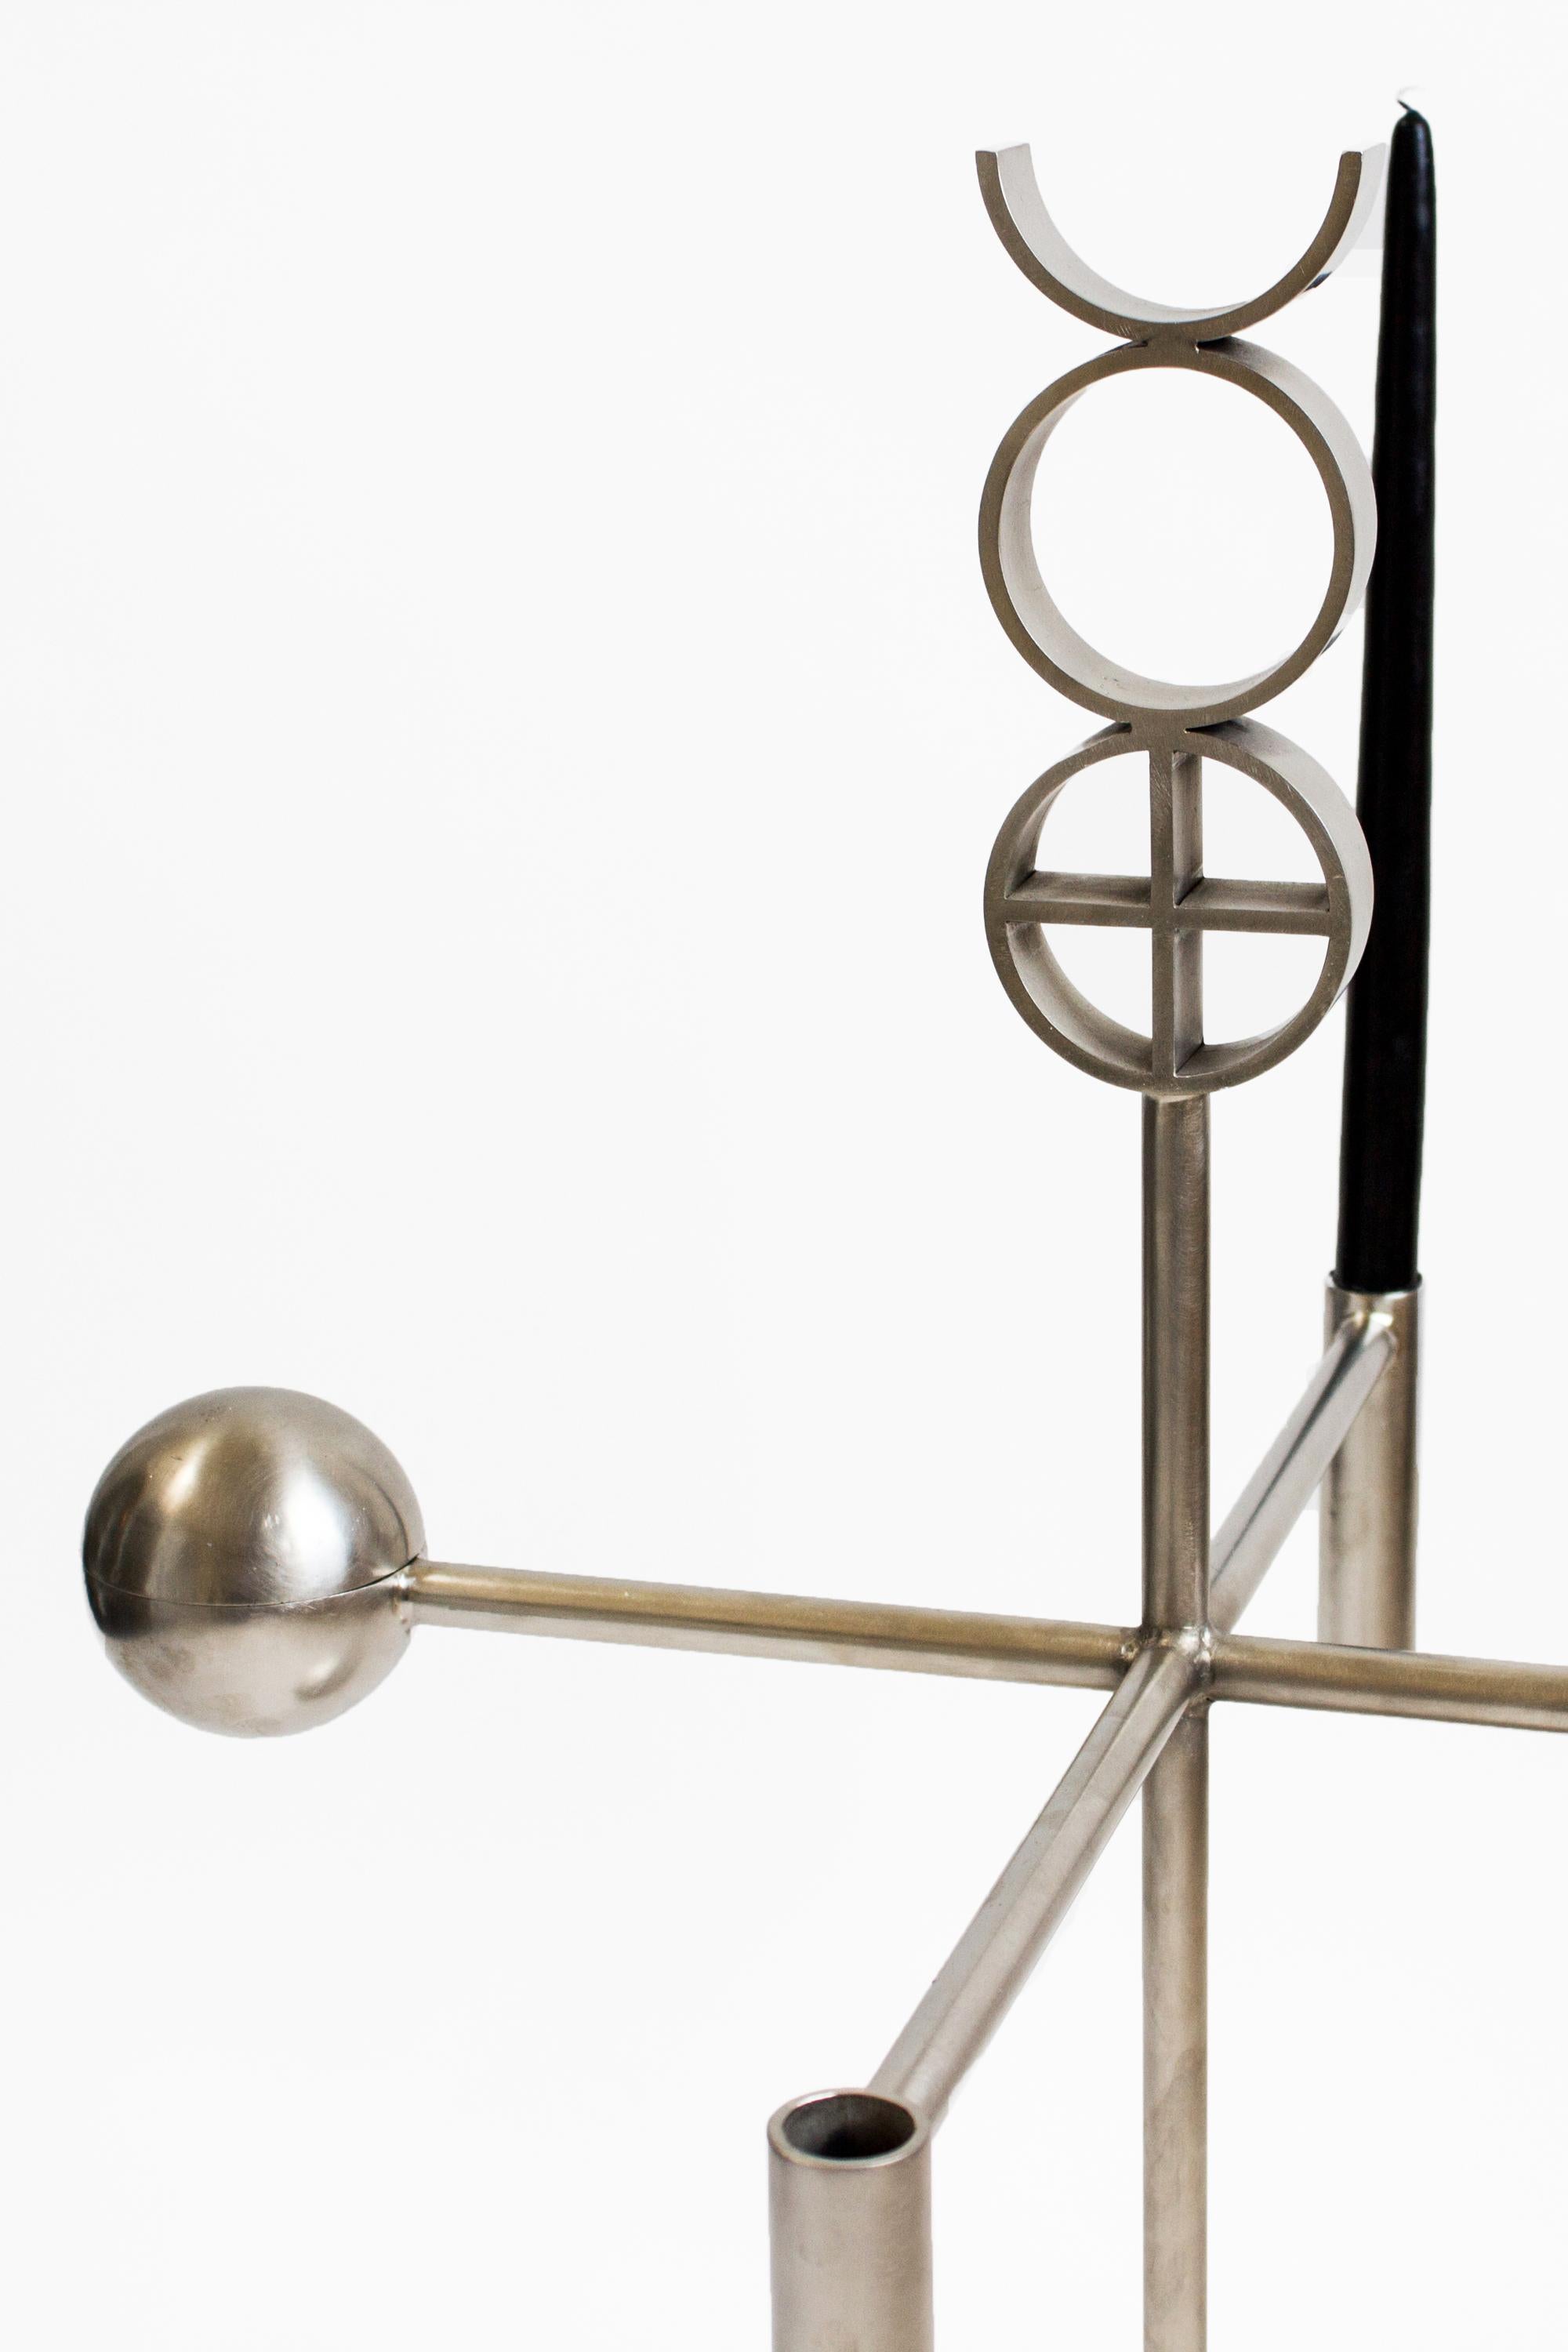 Material Lust [American, b. 1981,1986]
Alchemy Altar Candelabra, 2014 
Shown in brushed steel. 
Holds three 1